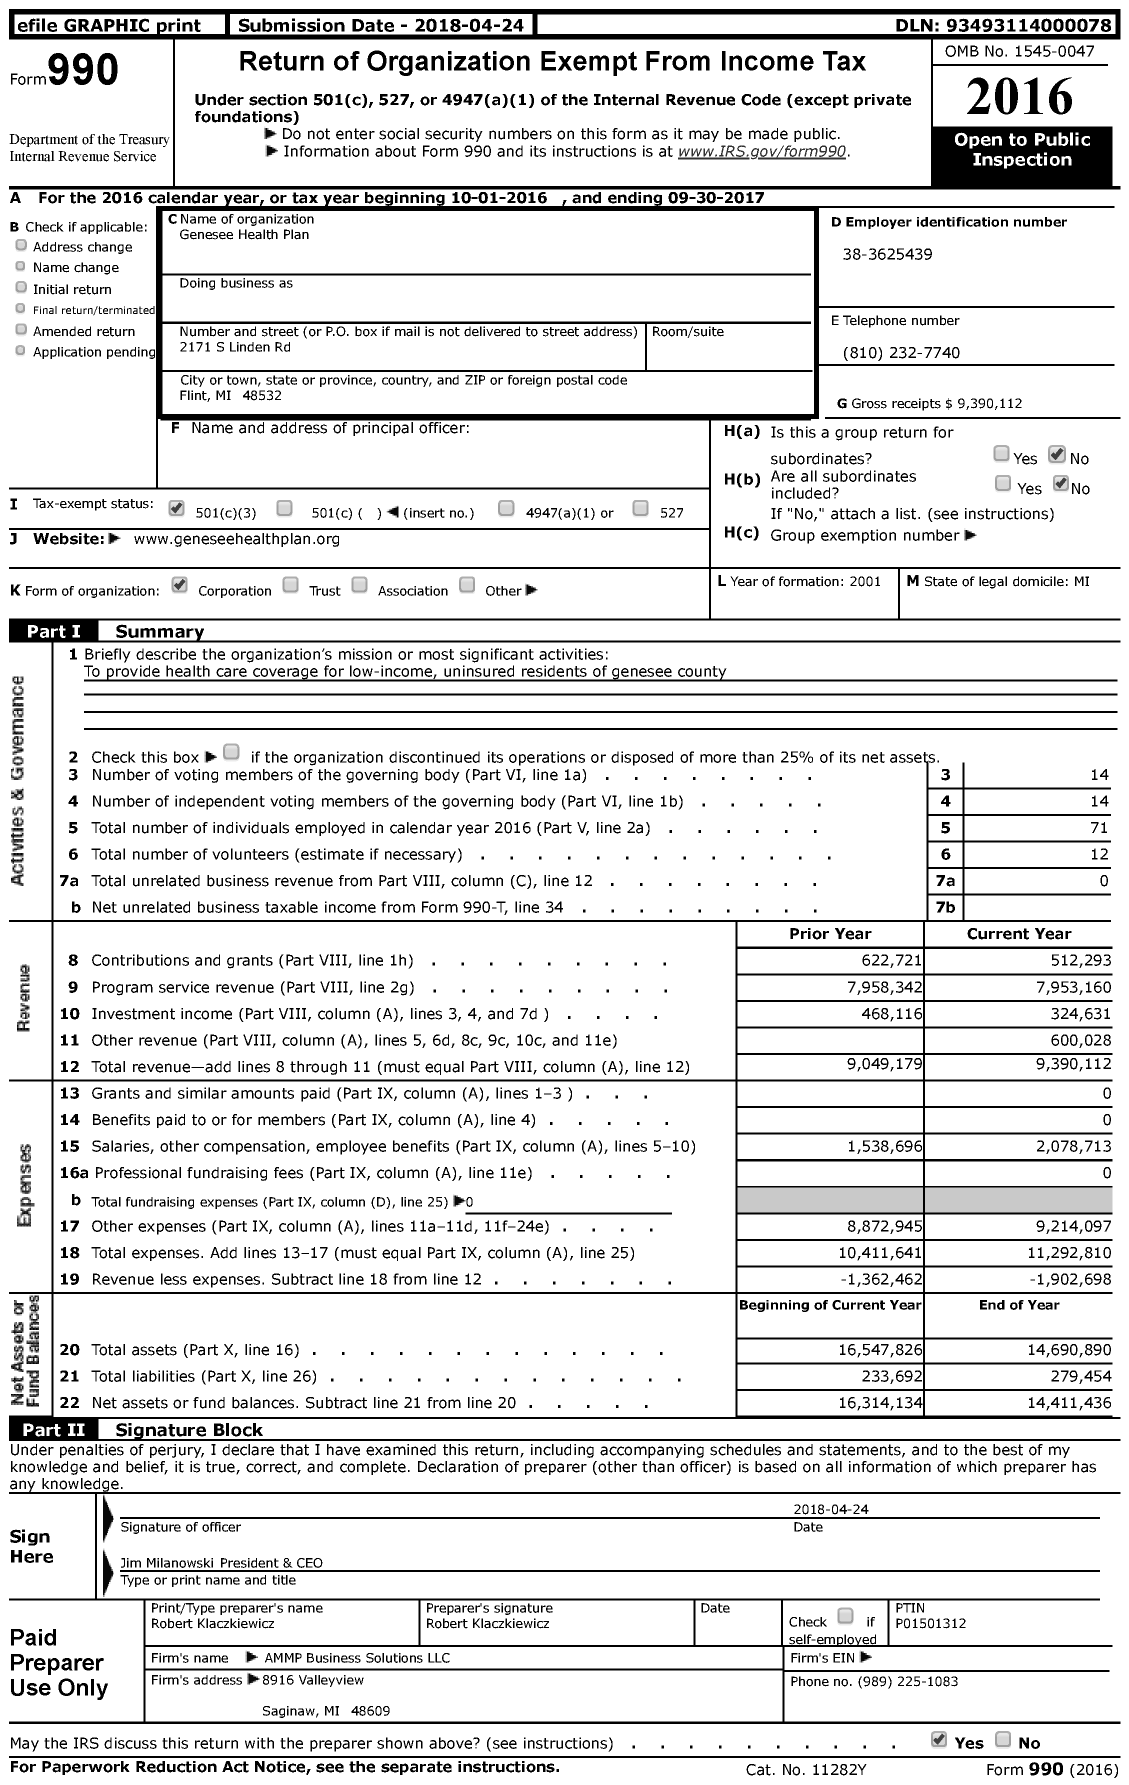 Image of first page of 2016 Form 990 for Genesee Health Plan (GHP)